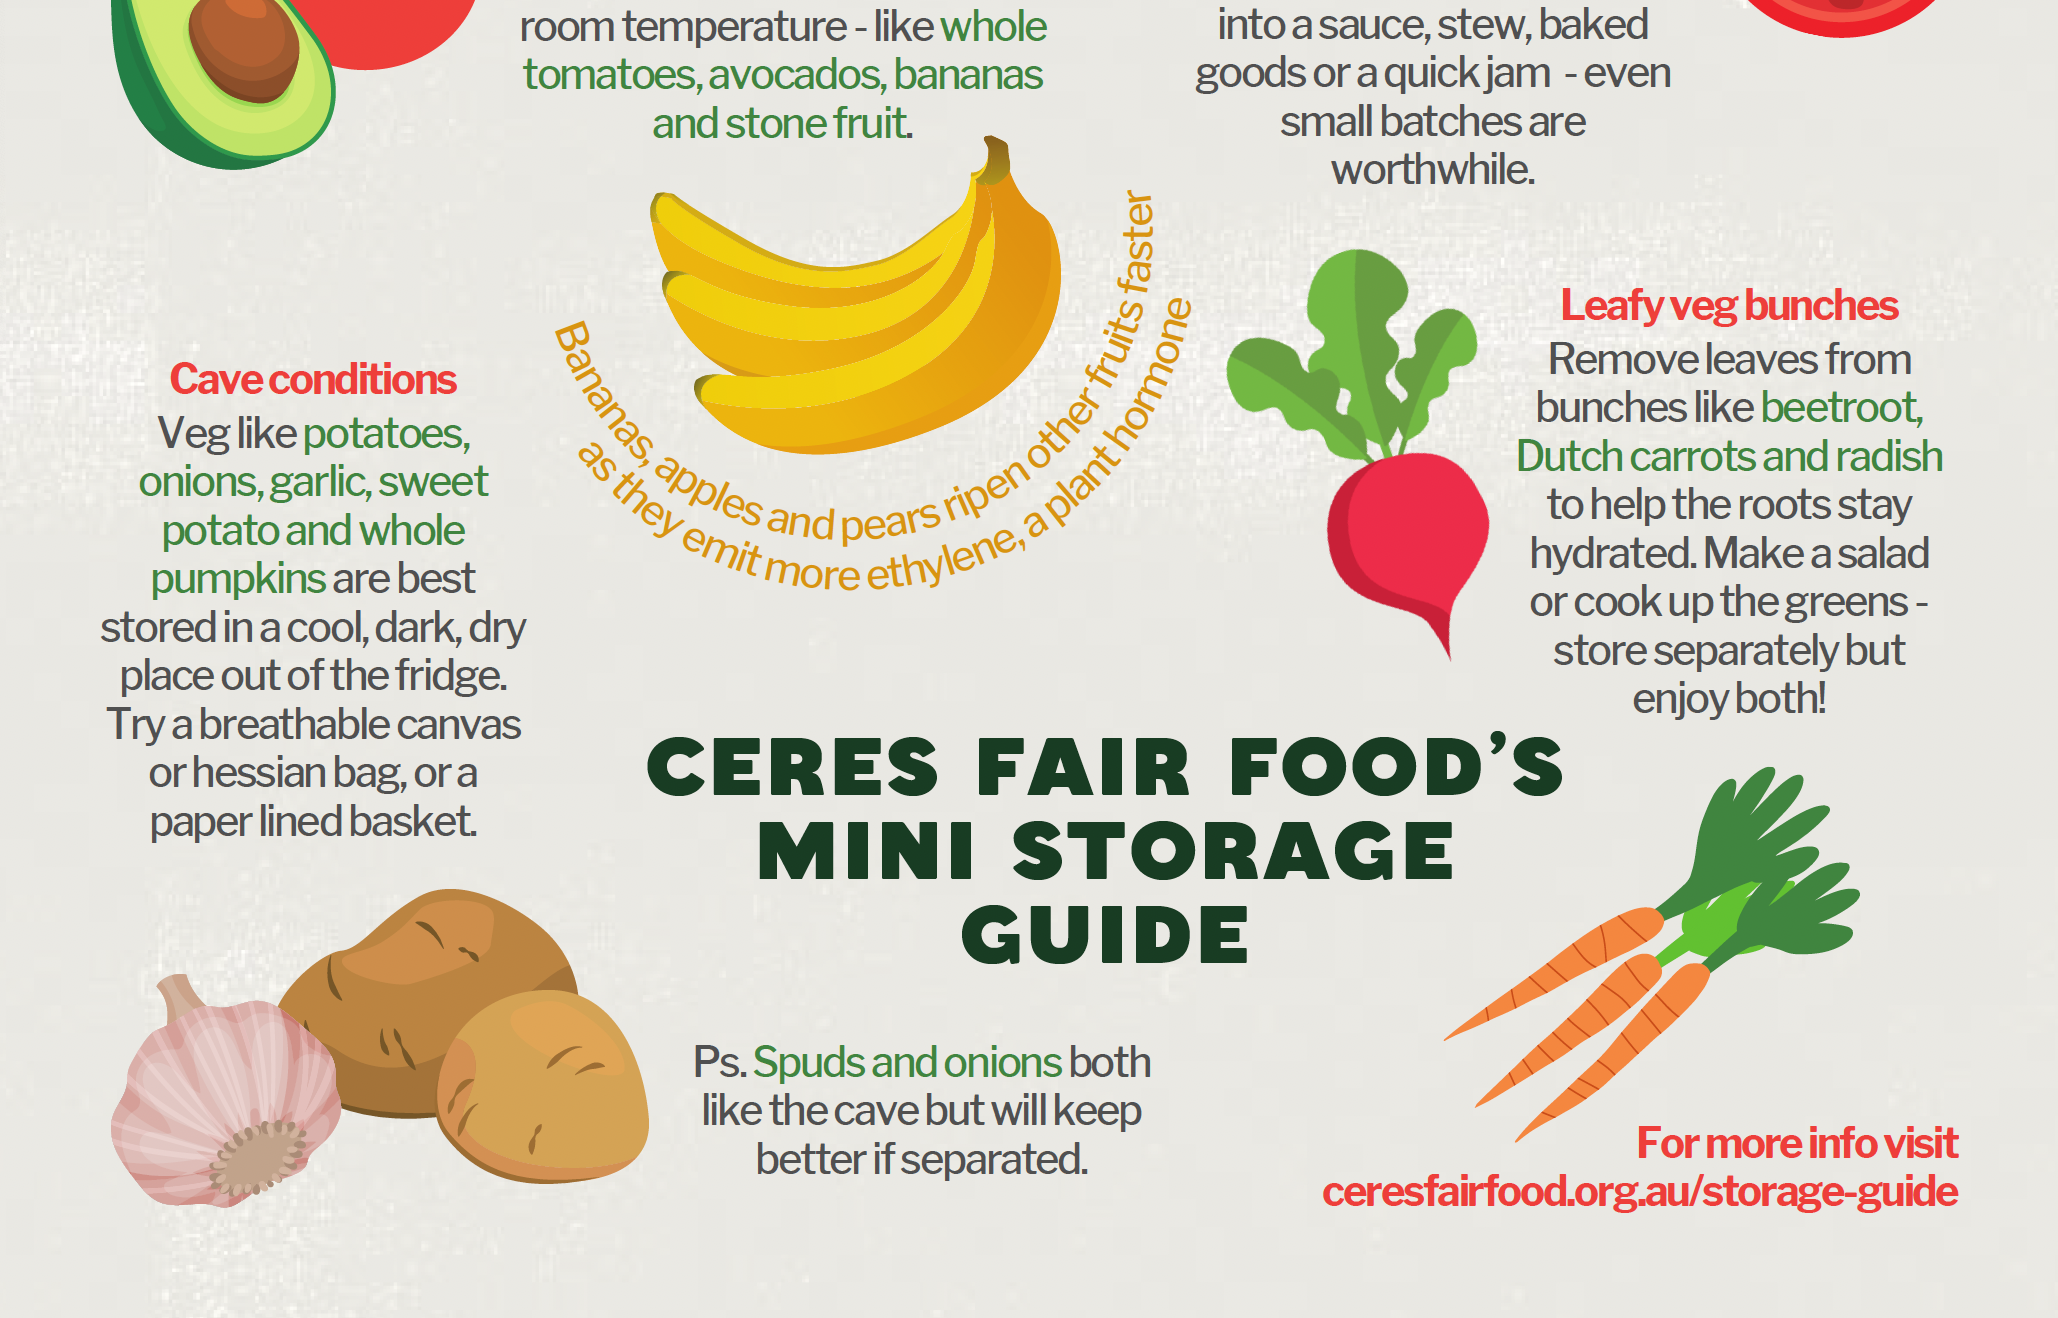 Mini fruit and veg storage guide, excerpt from pdf